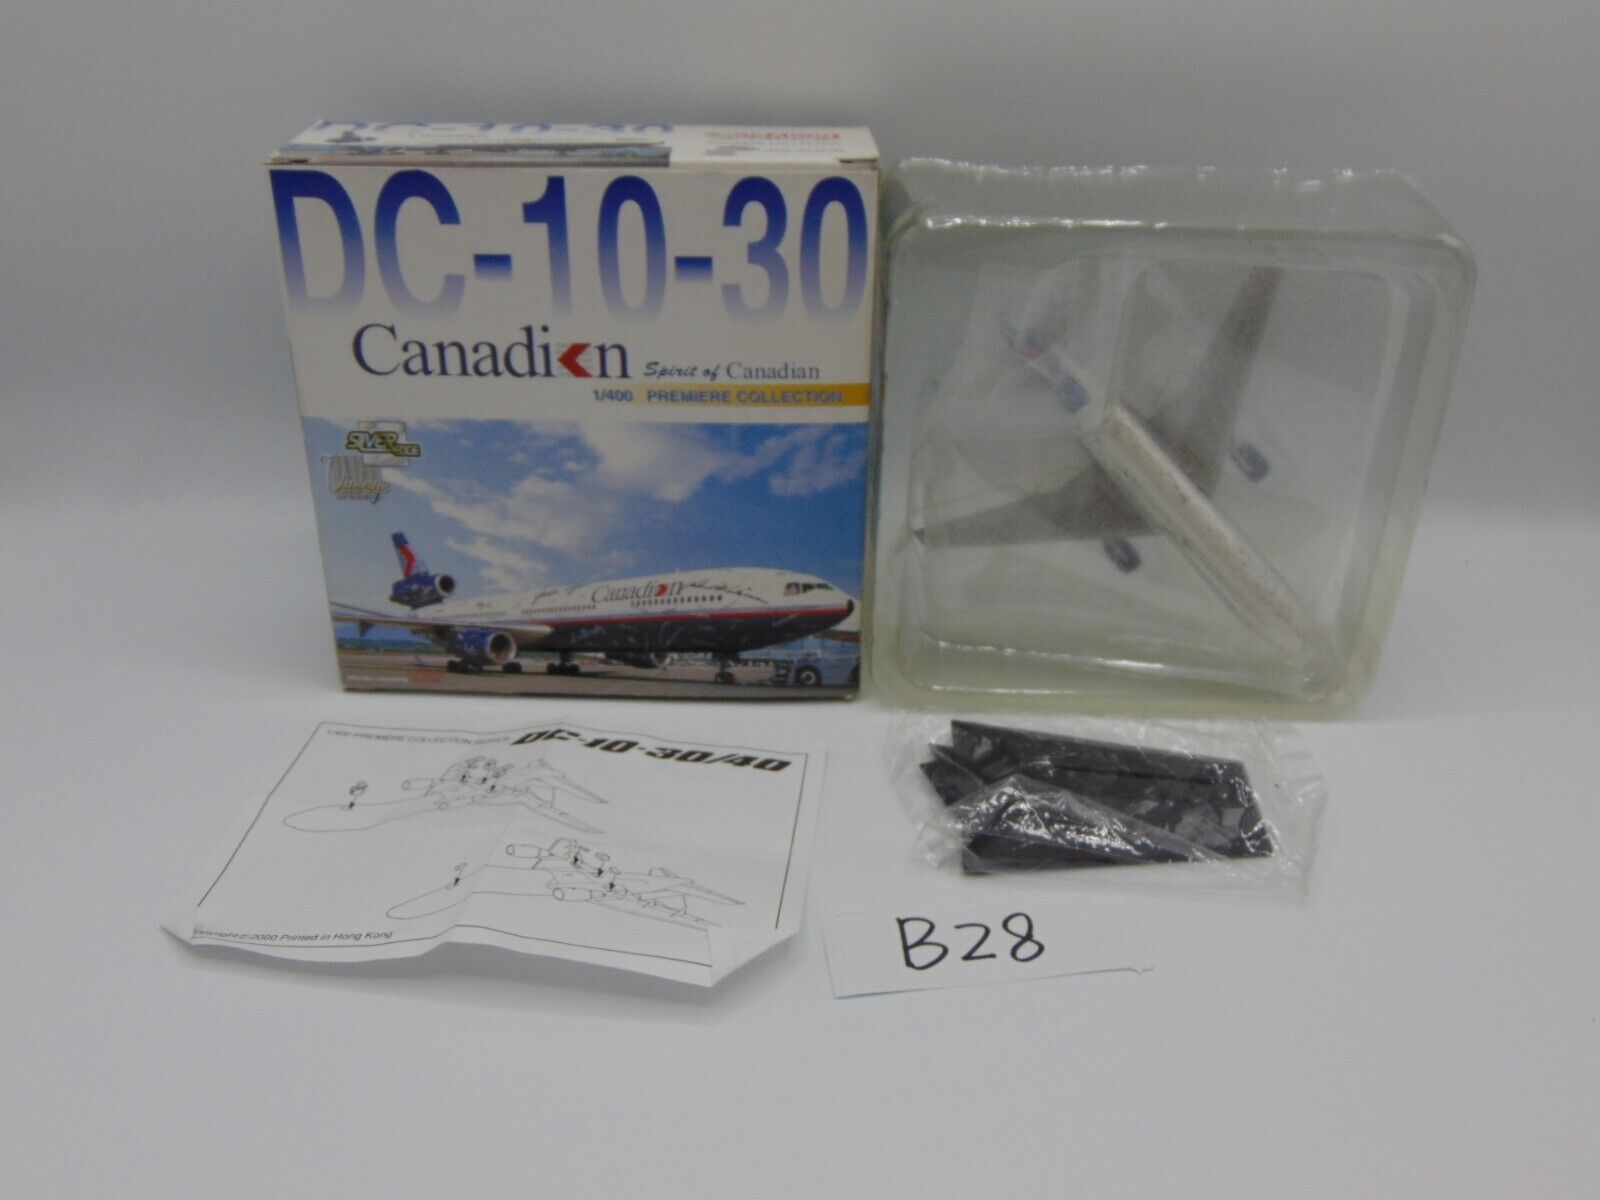 Dragon Wings 1:400 Canadian Spirt of Canadian DC-10-30 C-FCRE # 55180 In Box